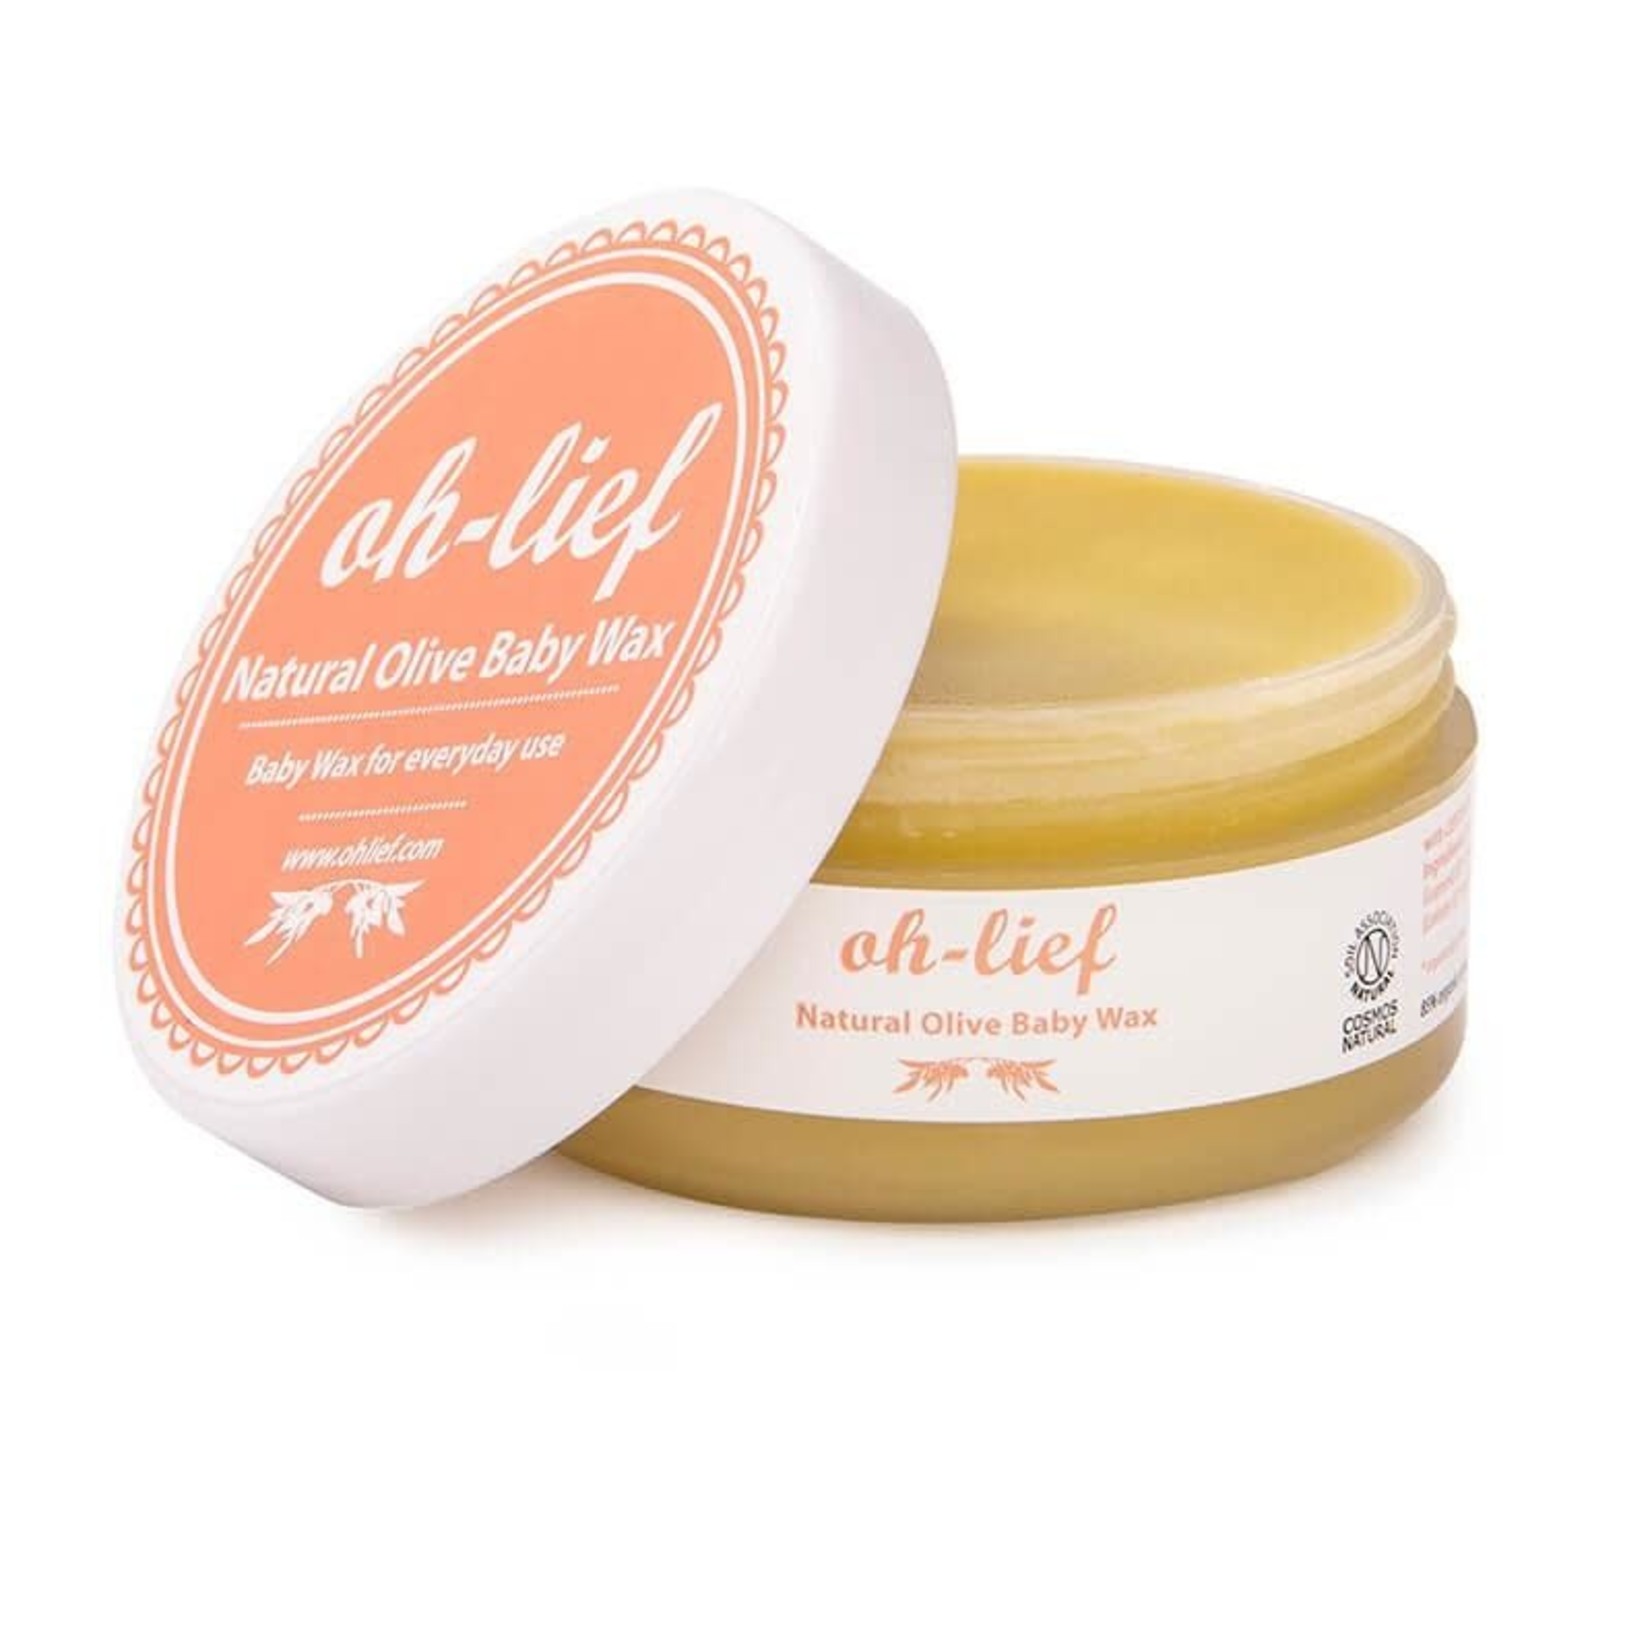 Oh-Lief Natural olive baby wax